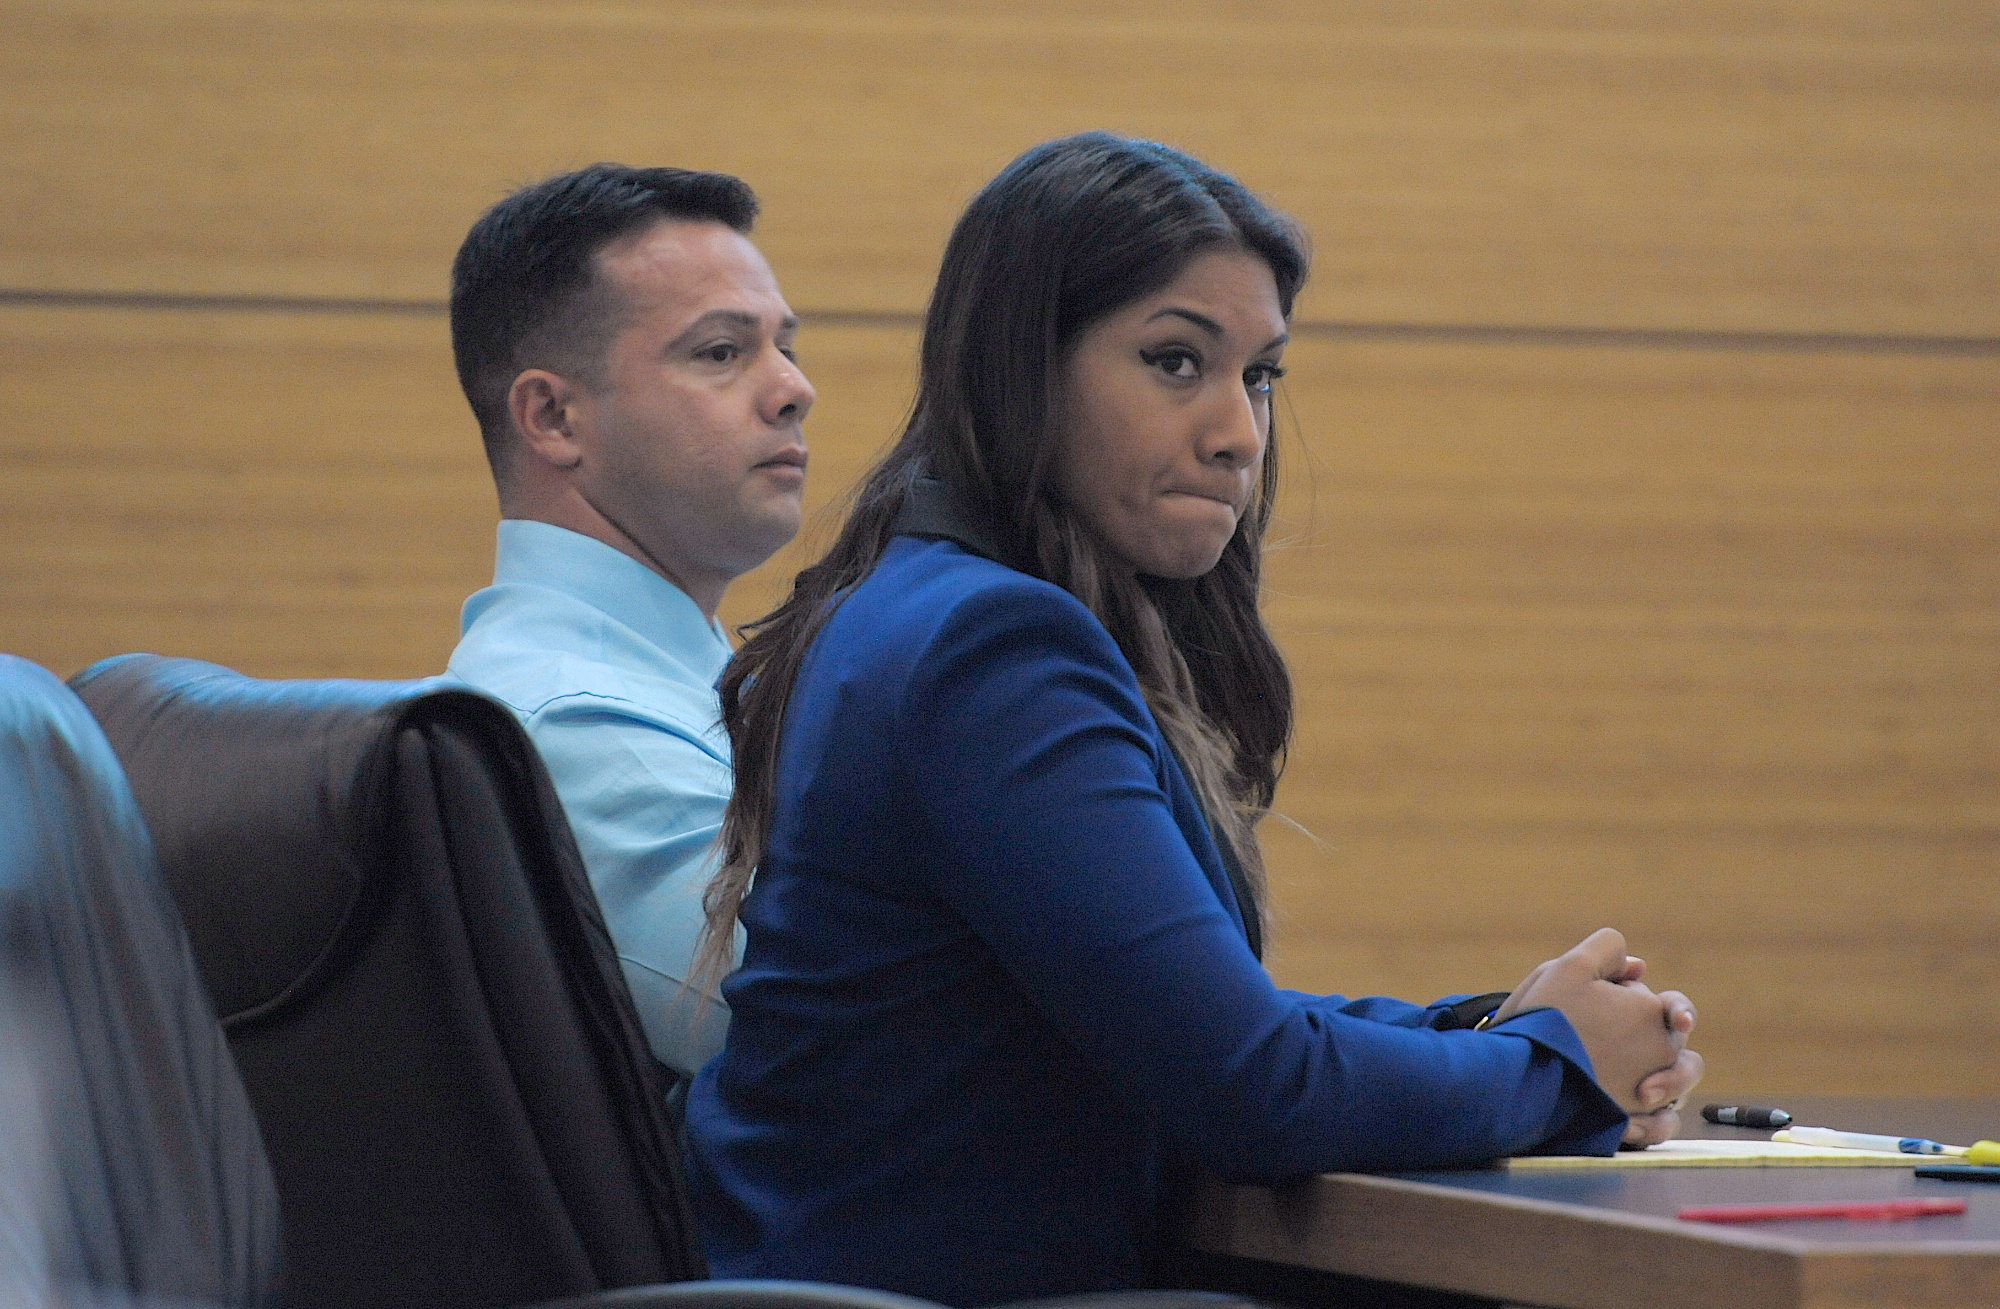 Elissa Alvarez, 20, right, and Jose Caballero, 40, listen to witness testimony during their trial for lewd and lascivious exhibition on May 1, 2015, at the Manatee County Judicial Center in Bradenton.